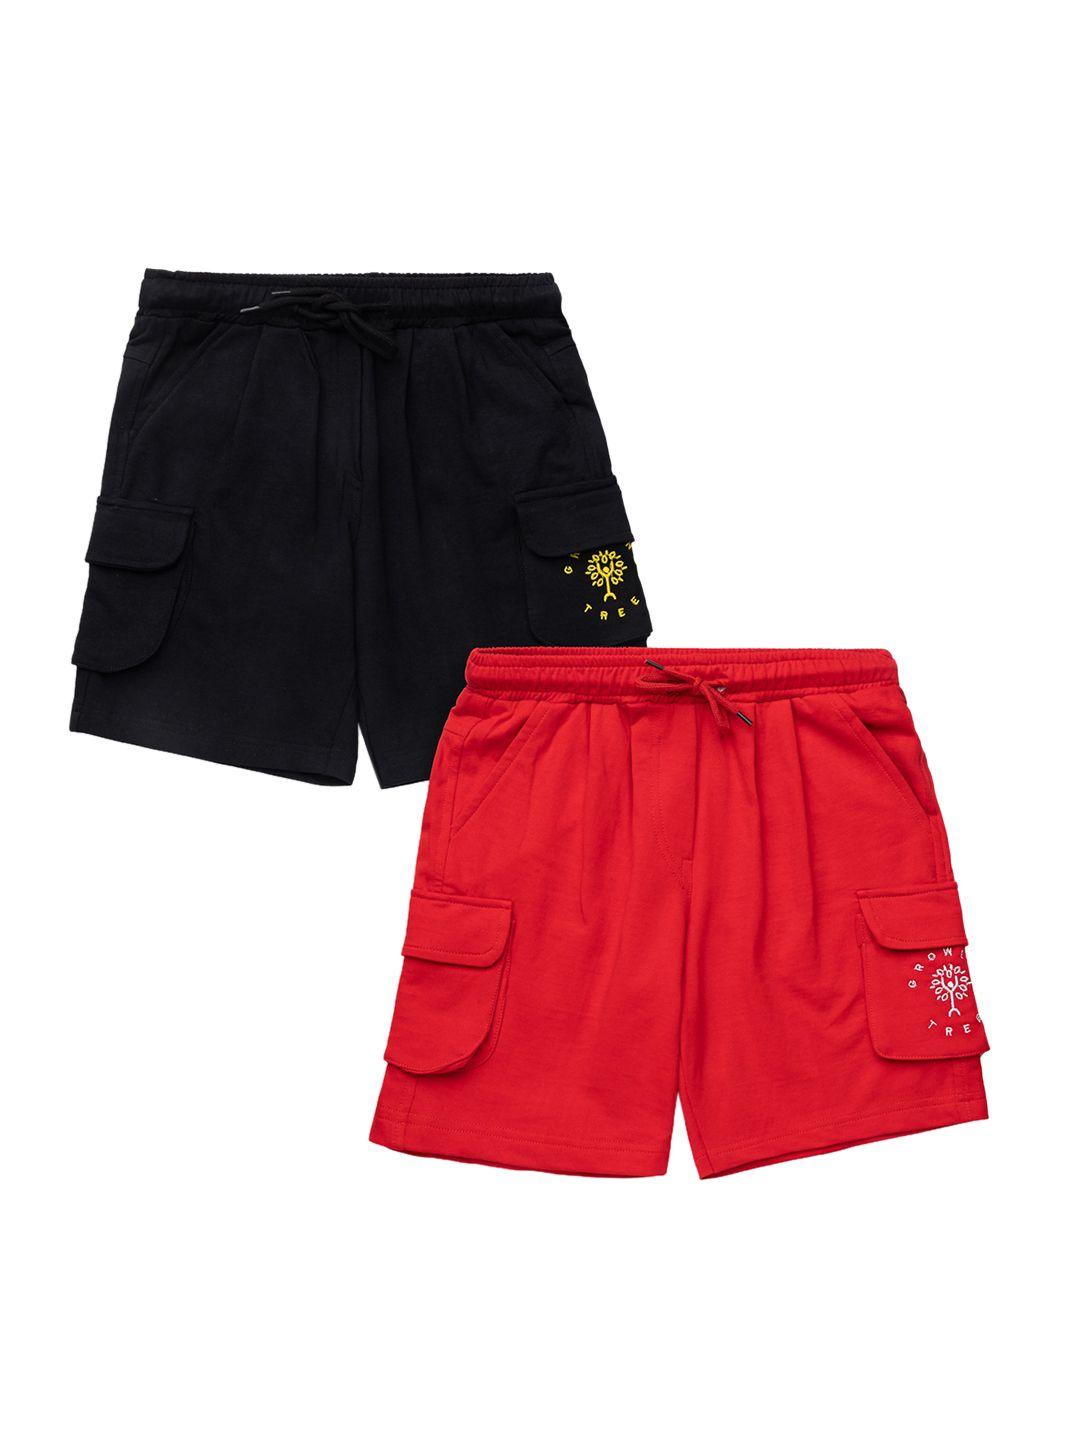 growing tree unisex kids multicoloured outdoor sports shorts with antimicrobial technology